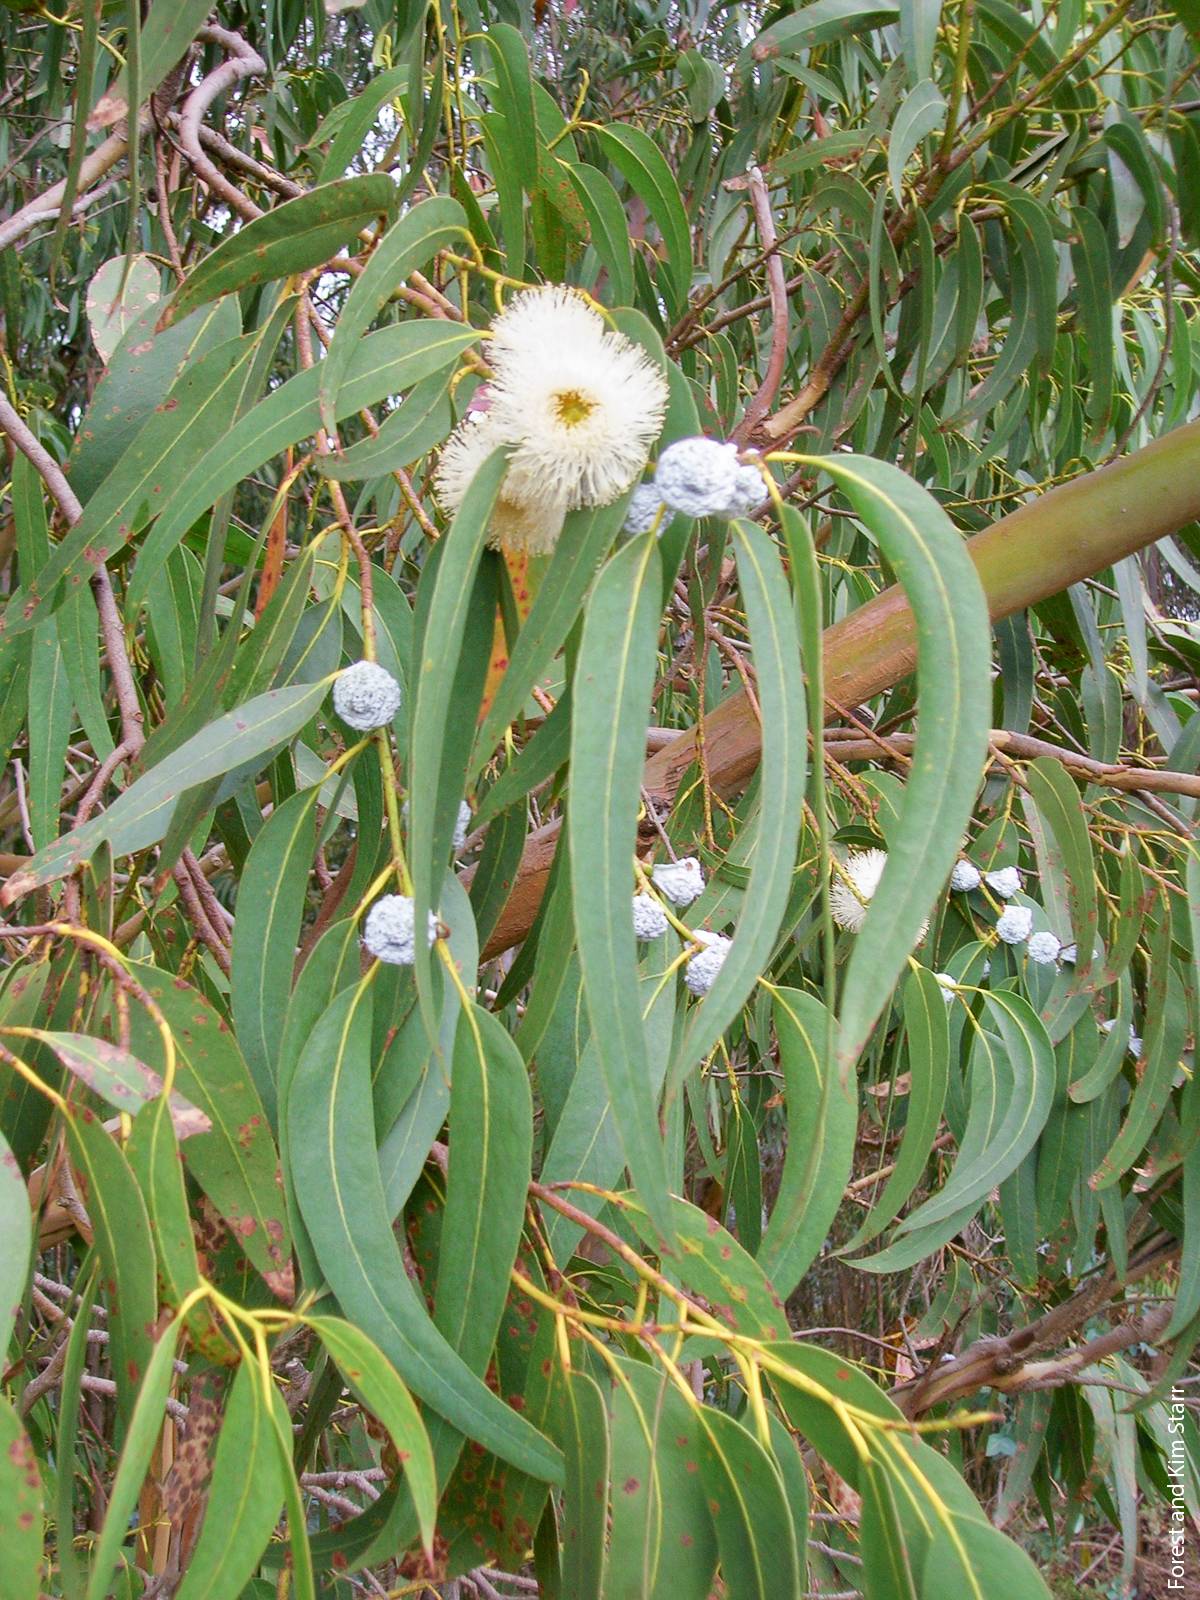 Oils and resins in leaves may increase flammability of blue gum and contribute to non-wettability of soils.